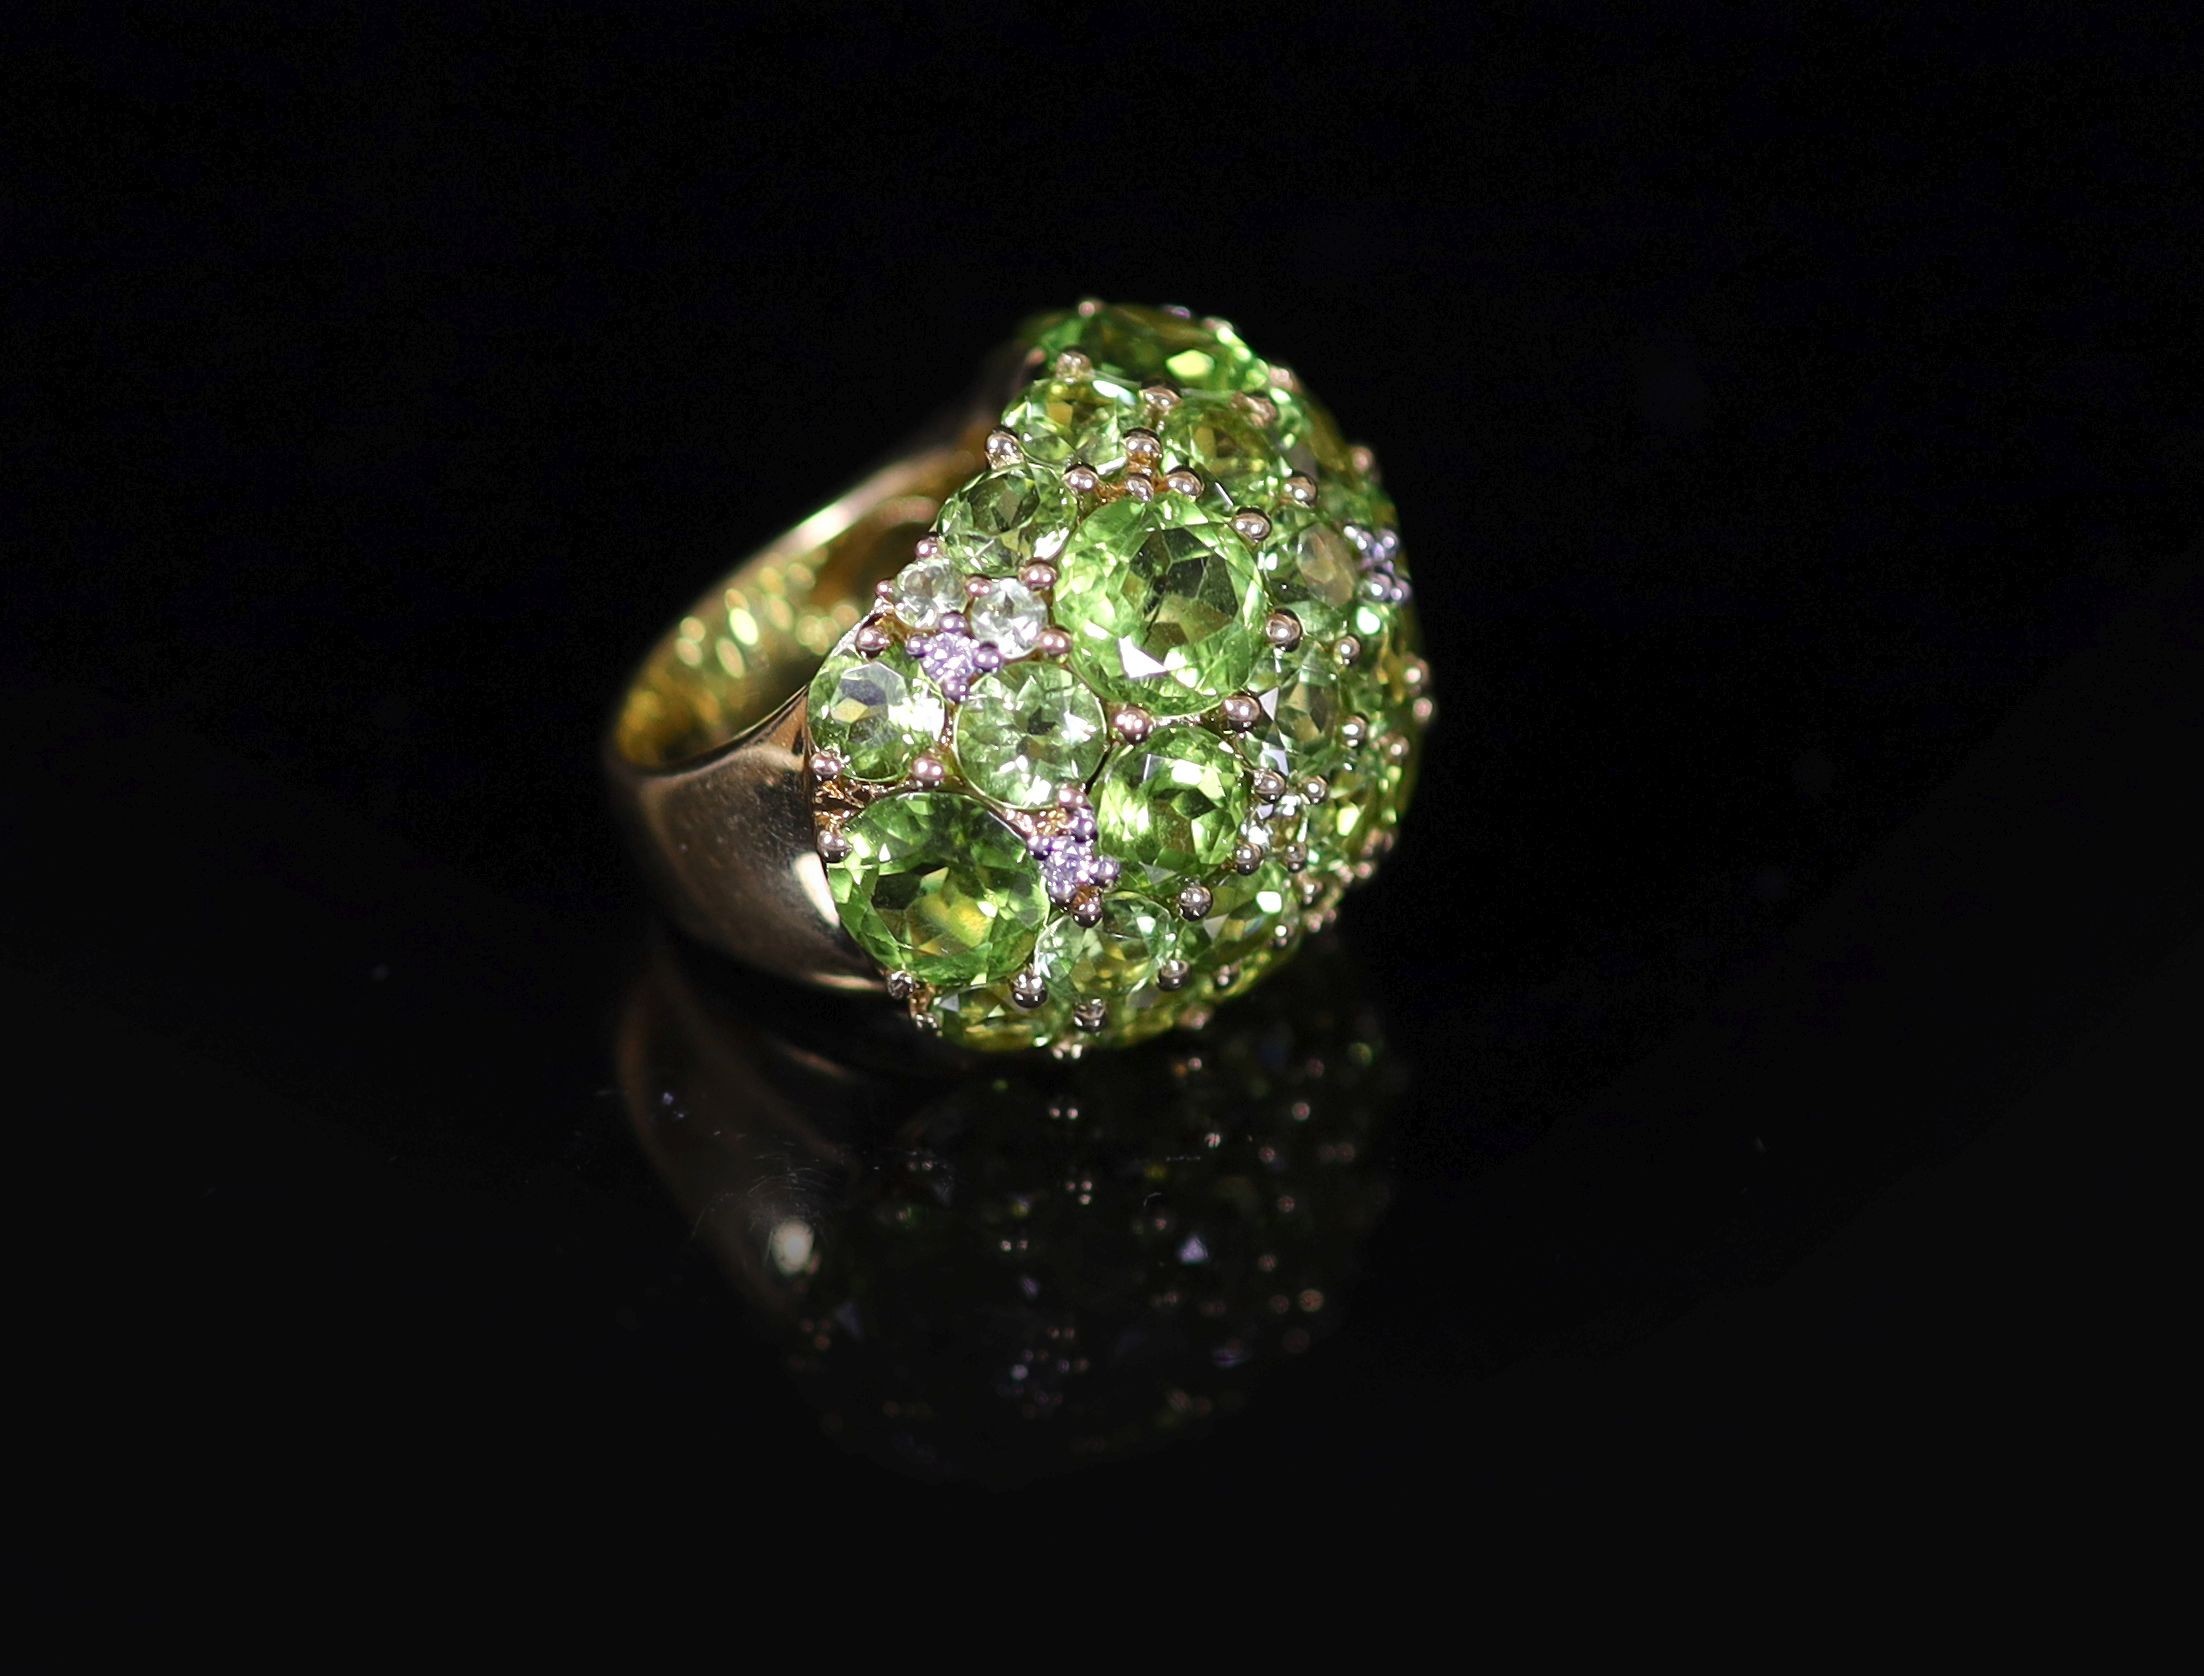 A Continental 18k gold and graduated round cut peridot encrusted dress ring, with diamond chip spacers